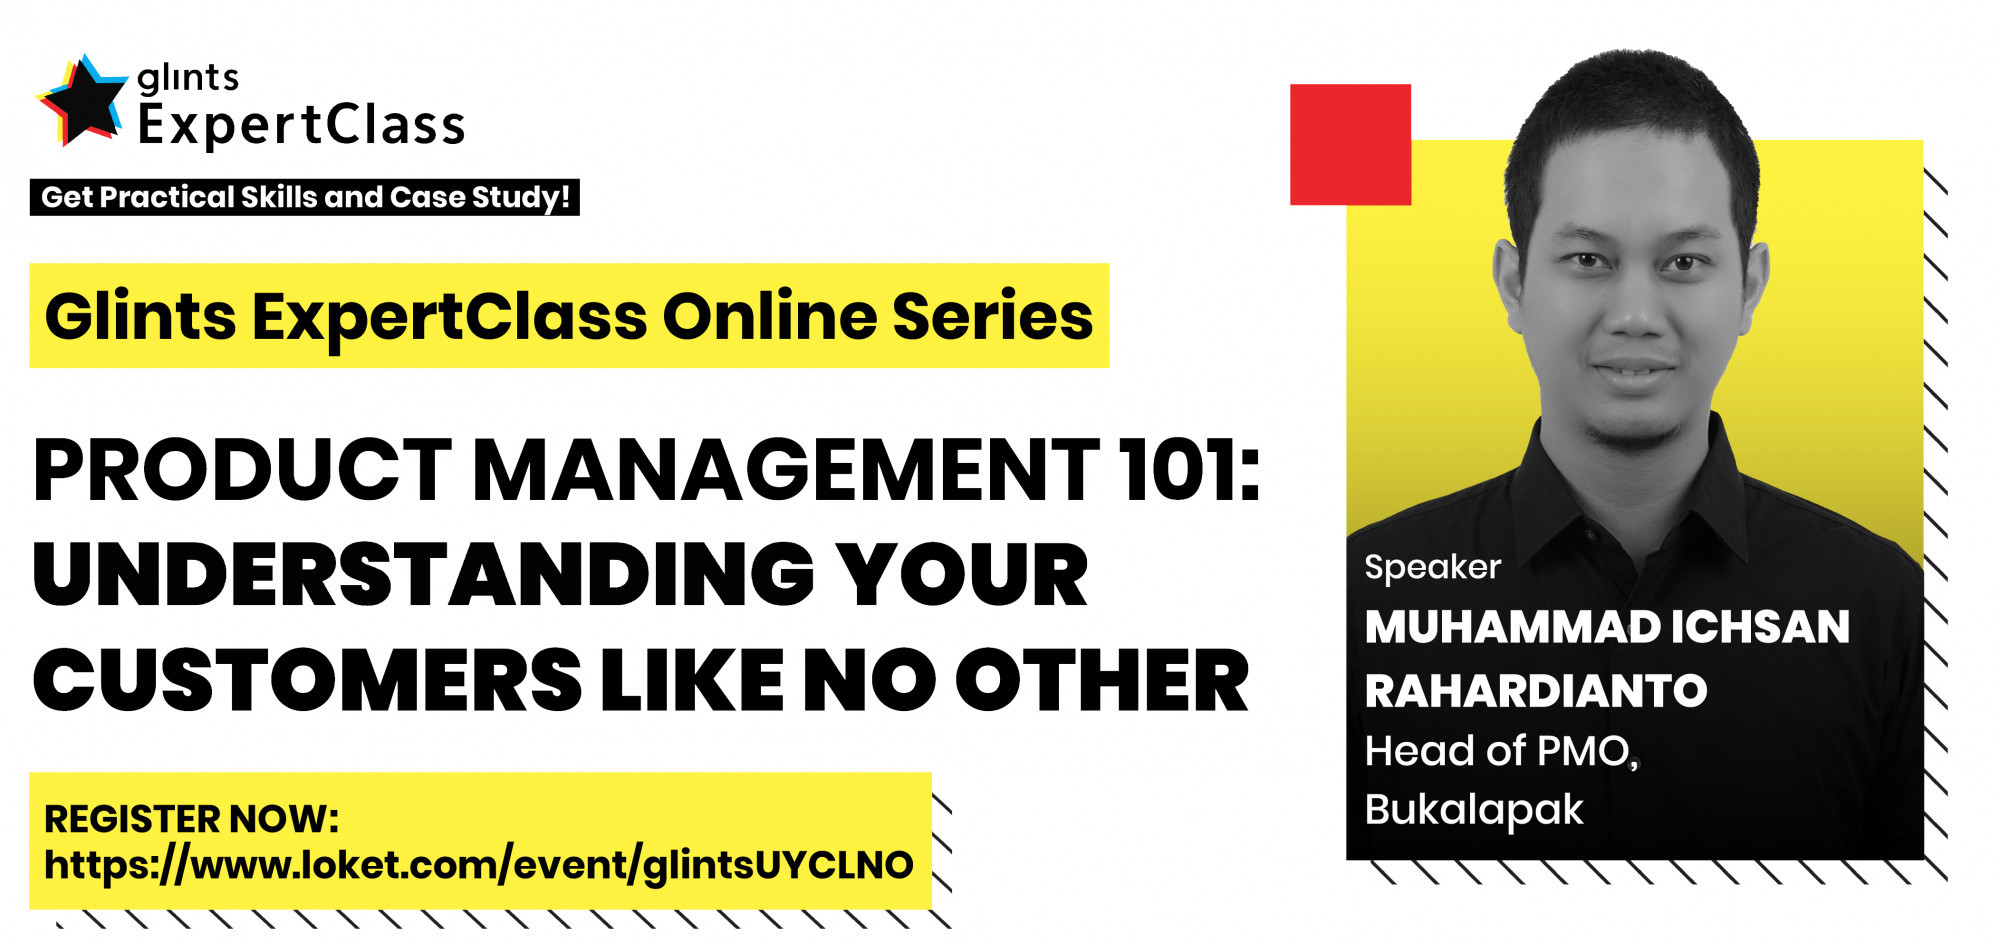 [Online Glints ExpertClass] Product Management 101: Understanding Your Customers Like No Others